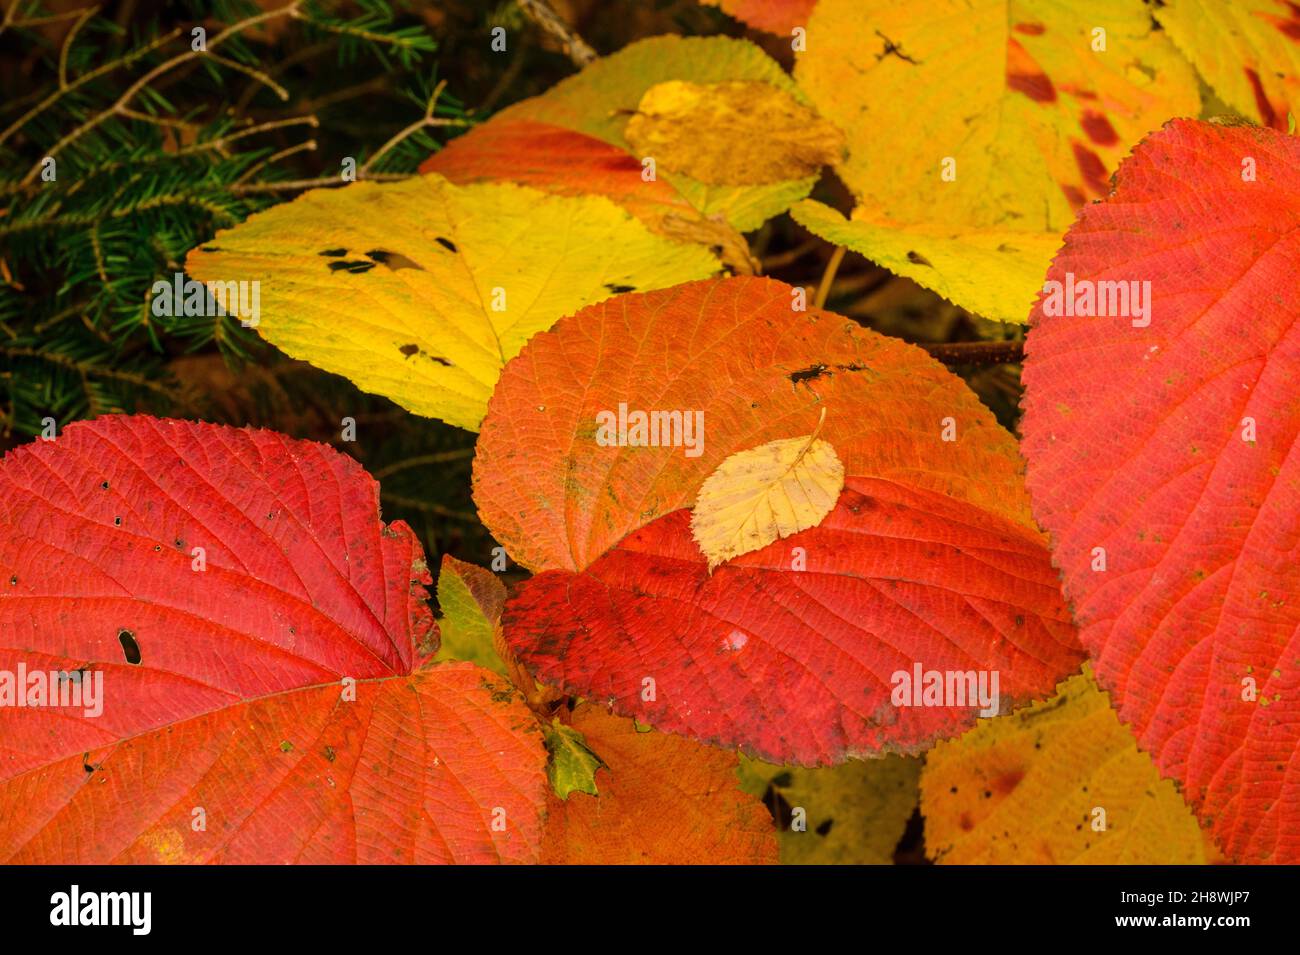 Fallen autumn leaf in the woodland understory, Highway 16 near Pinkham Notch, New Hampshire, USA Stock Photo